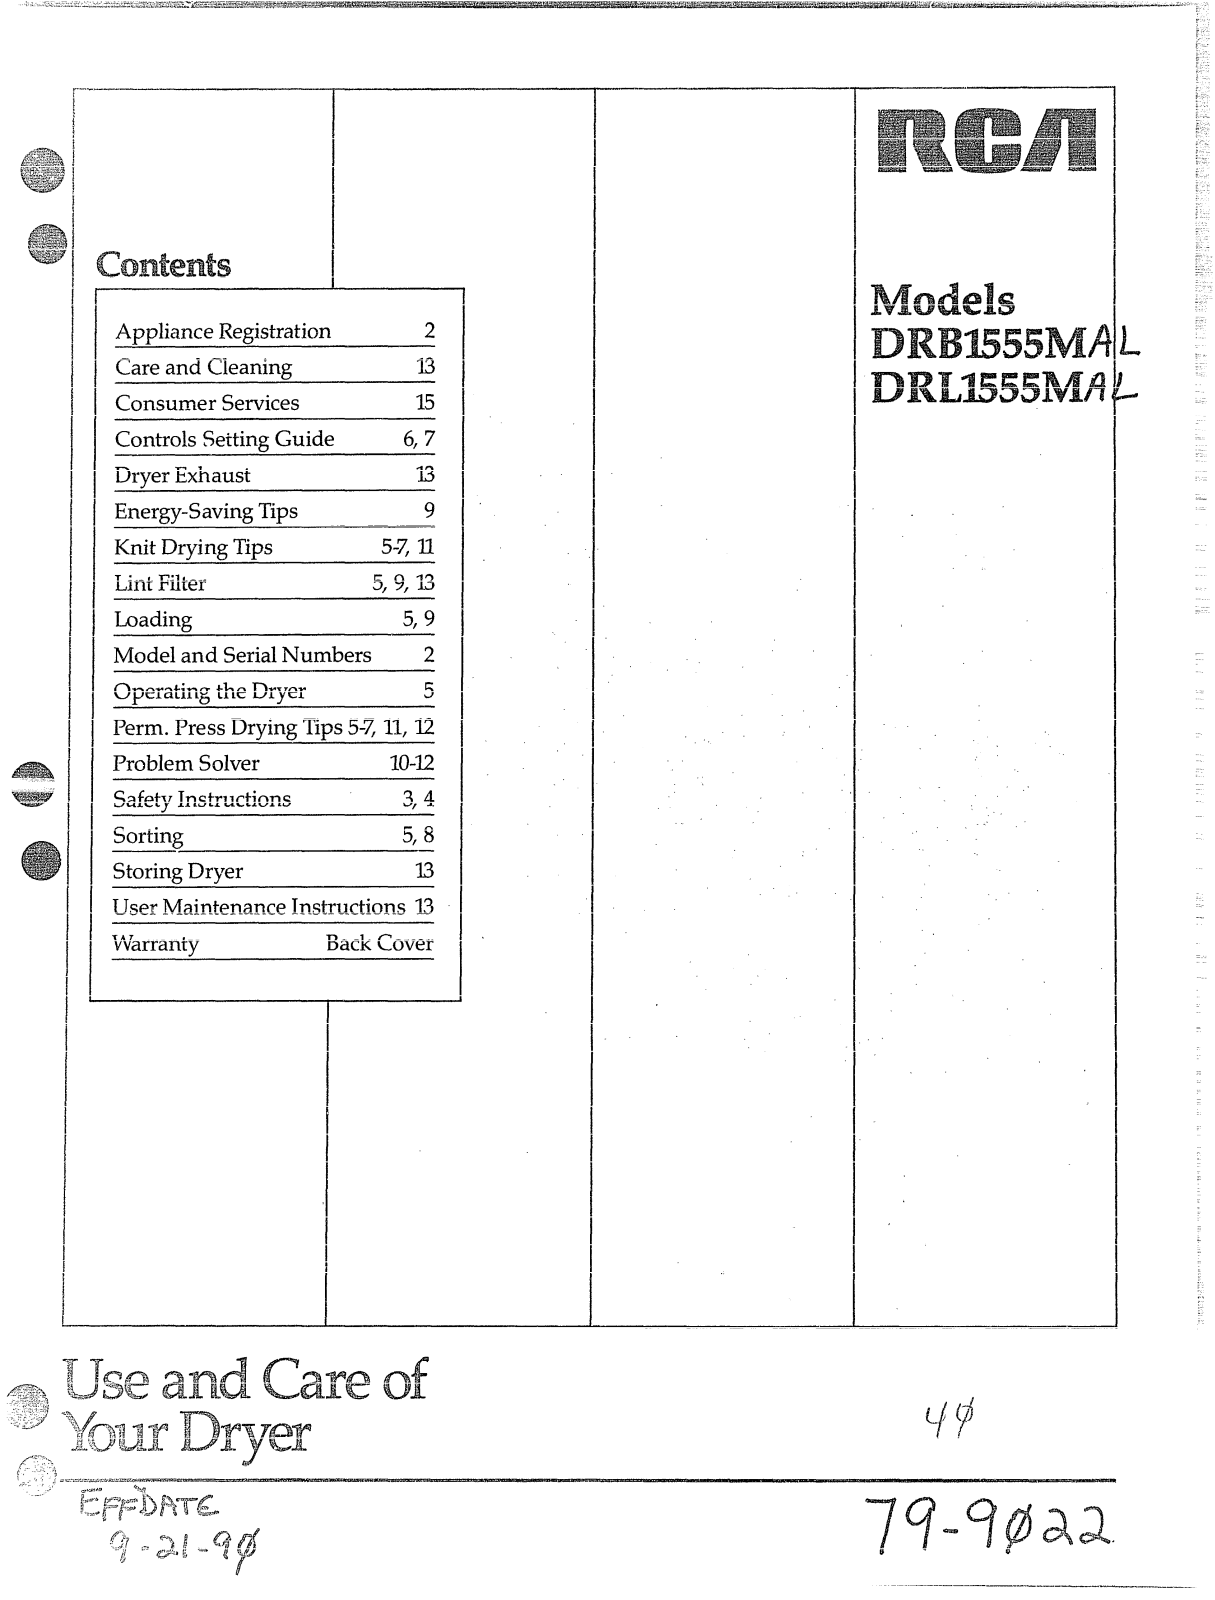 GE DRL1555M, DRB1555M Use and Care Manual